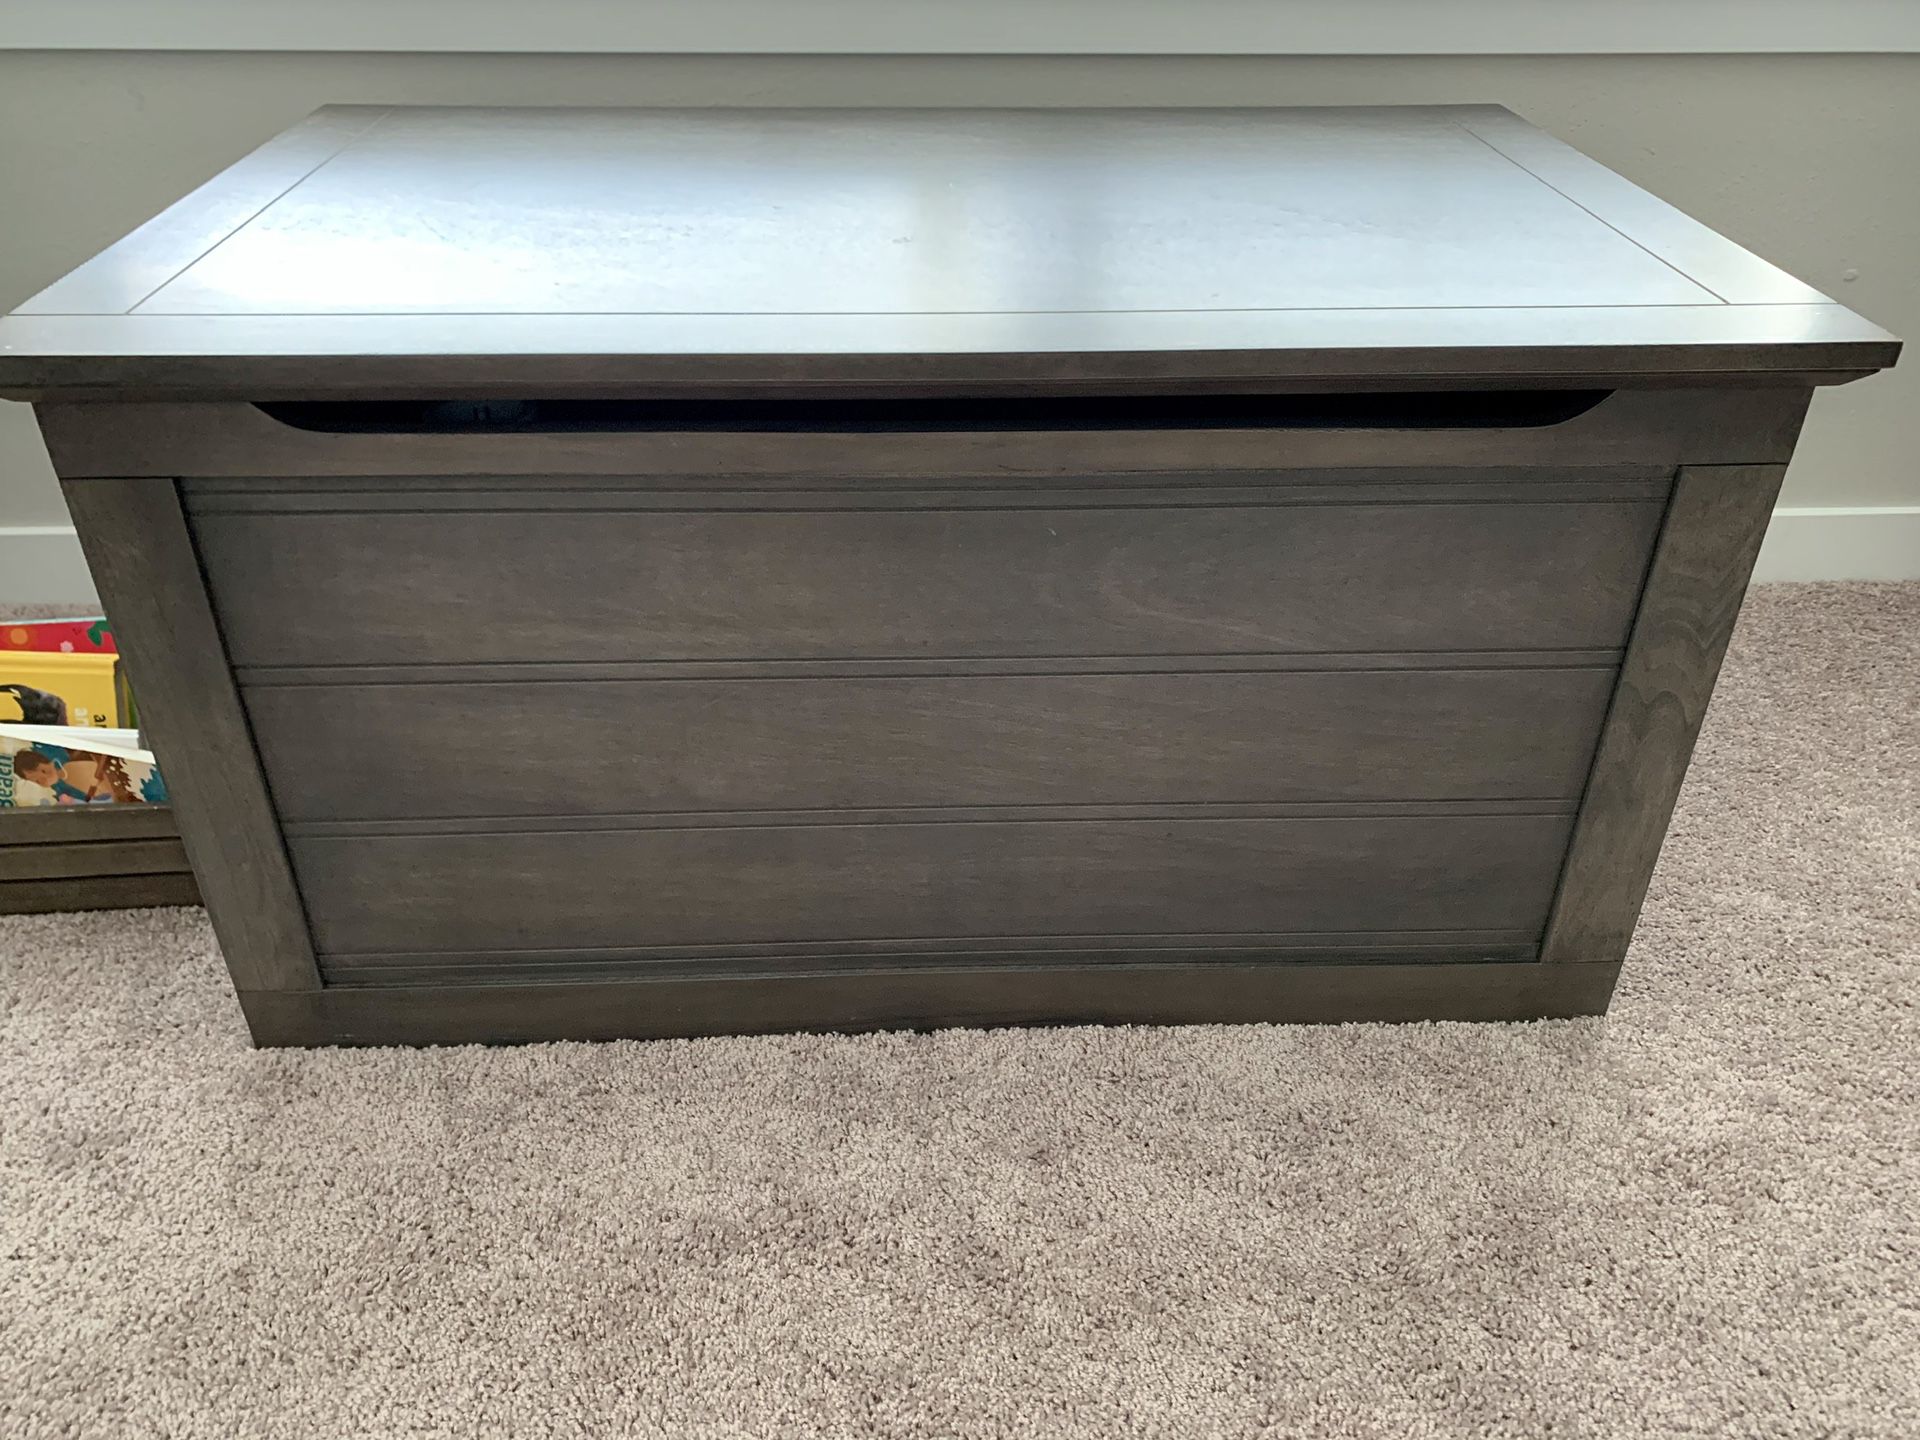 NEW! Toy chest